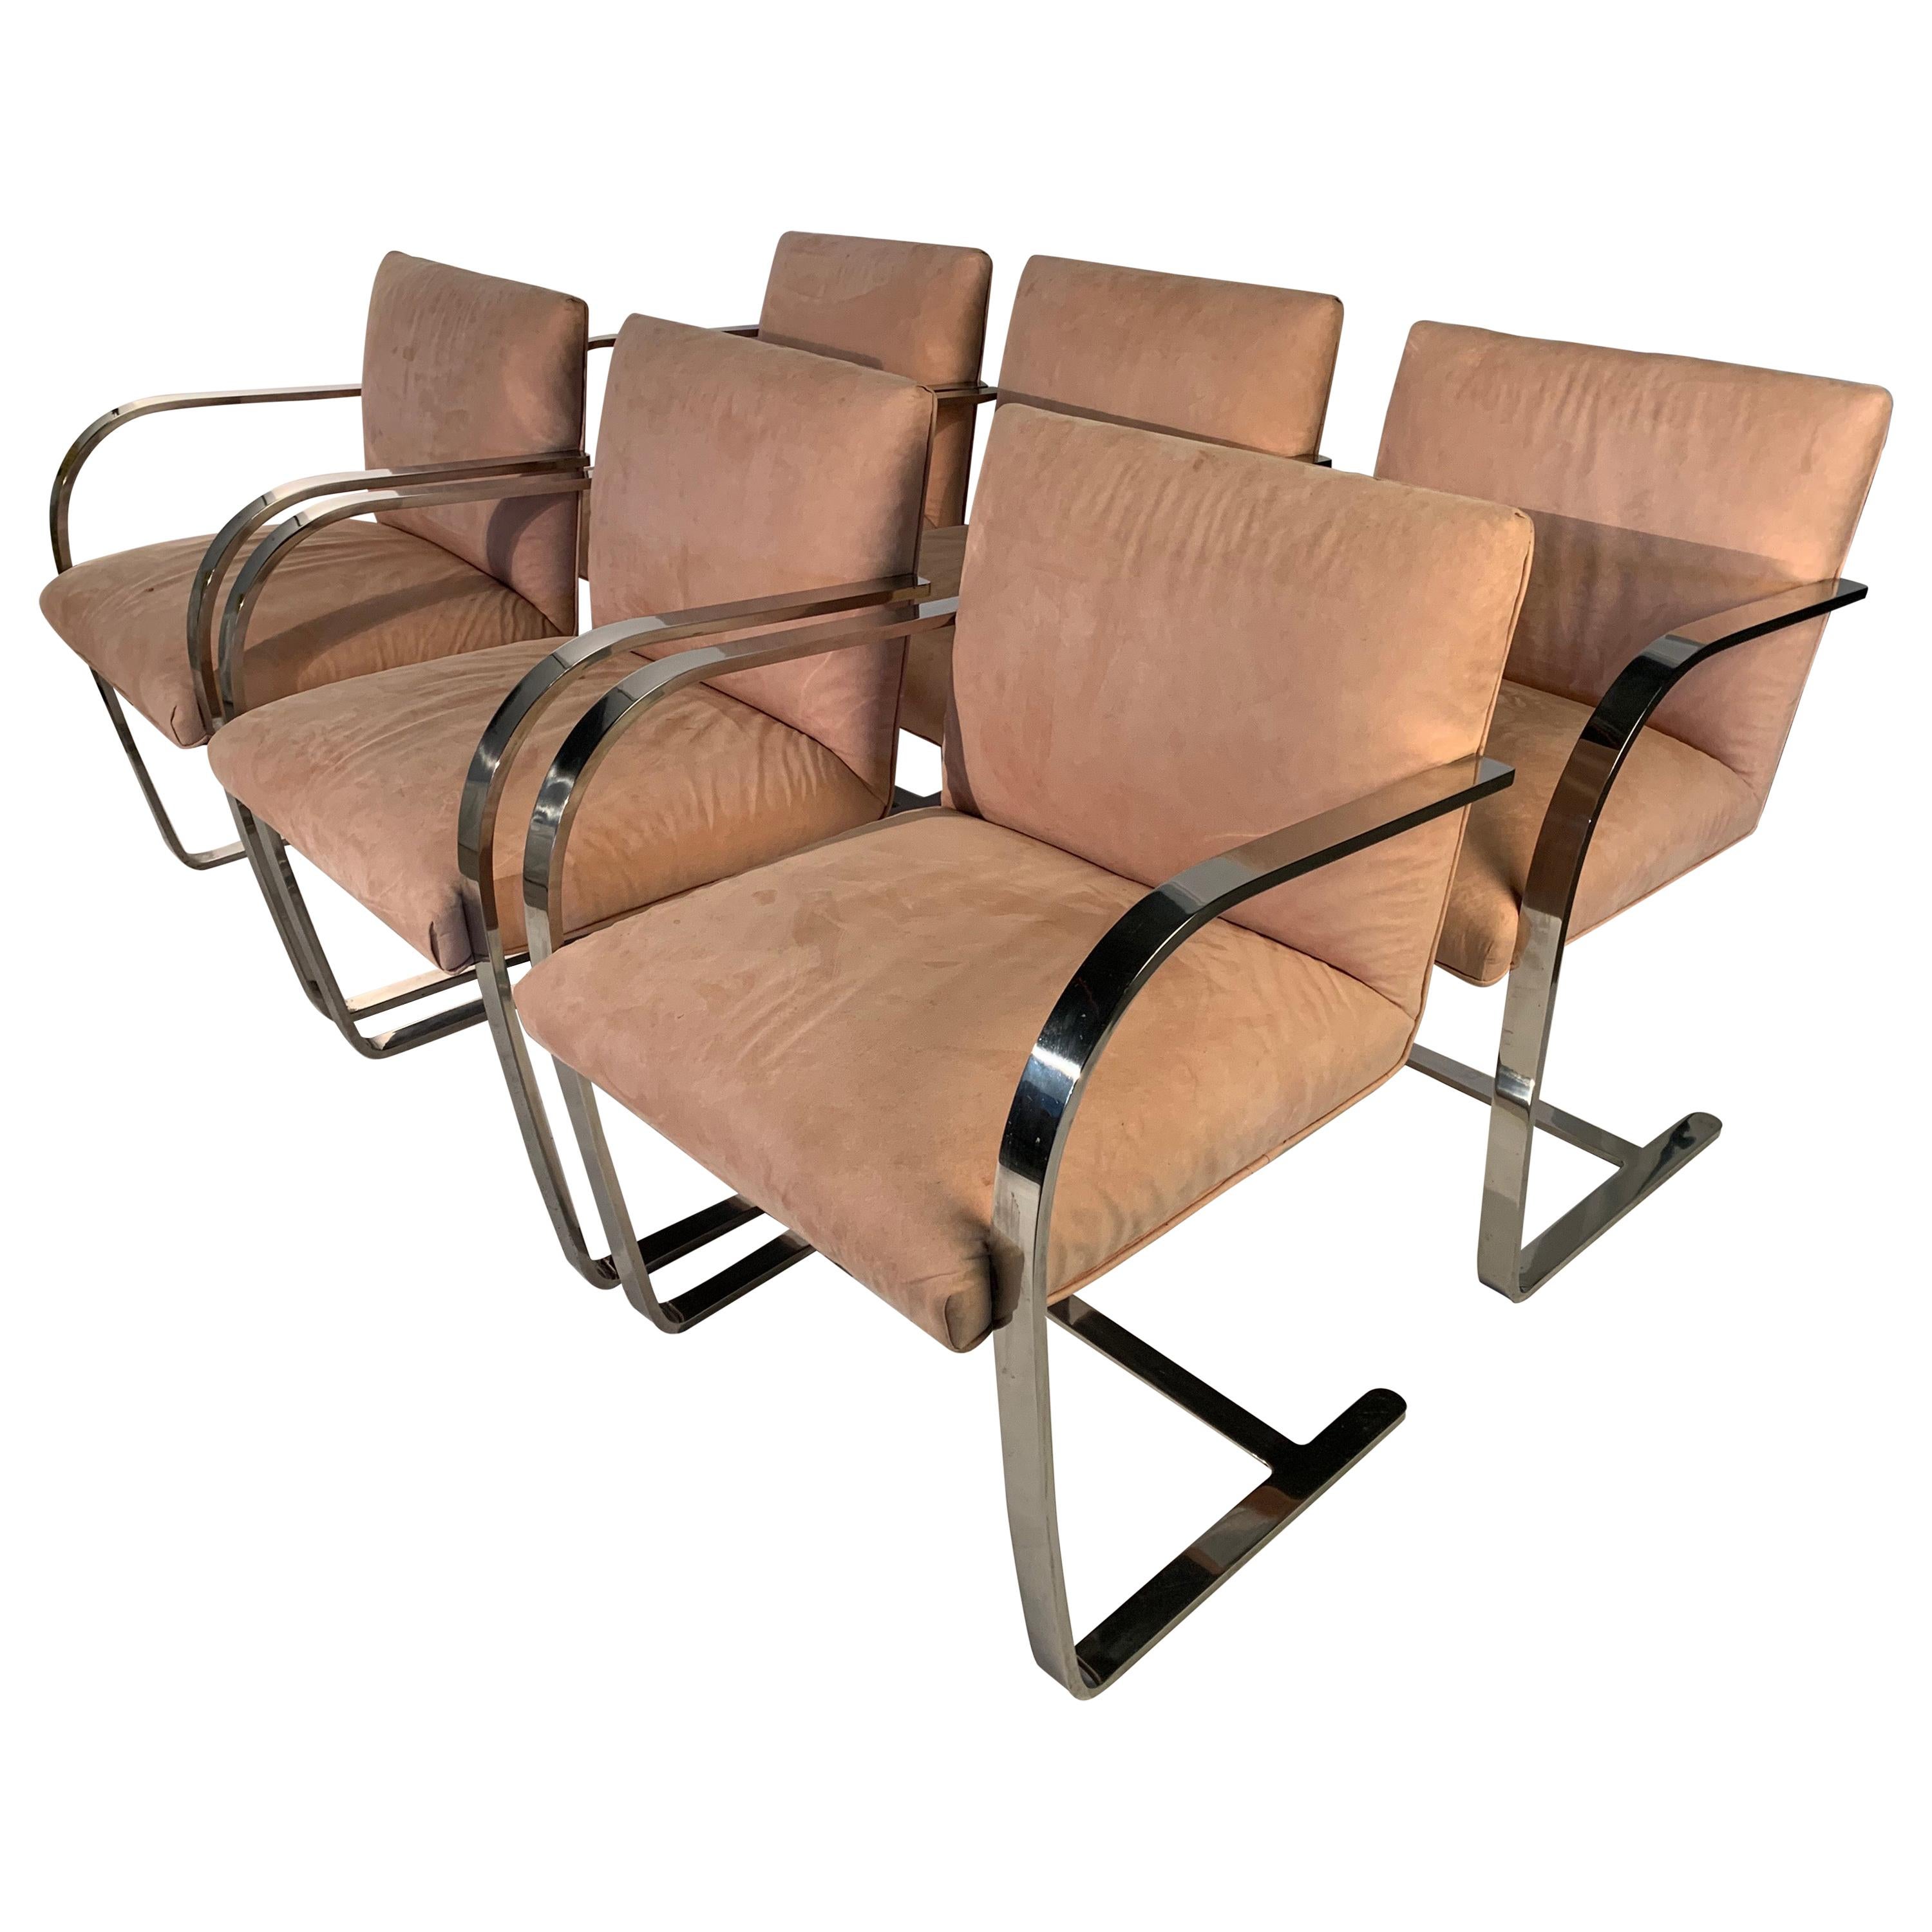 6 Mies van der Rohe style Cantilever Brno Dining Chairs, Italy circa 1970